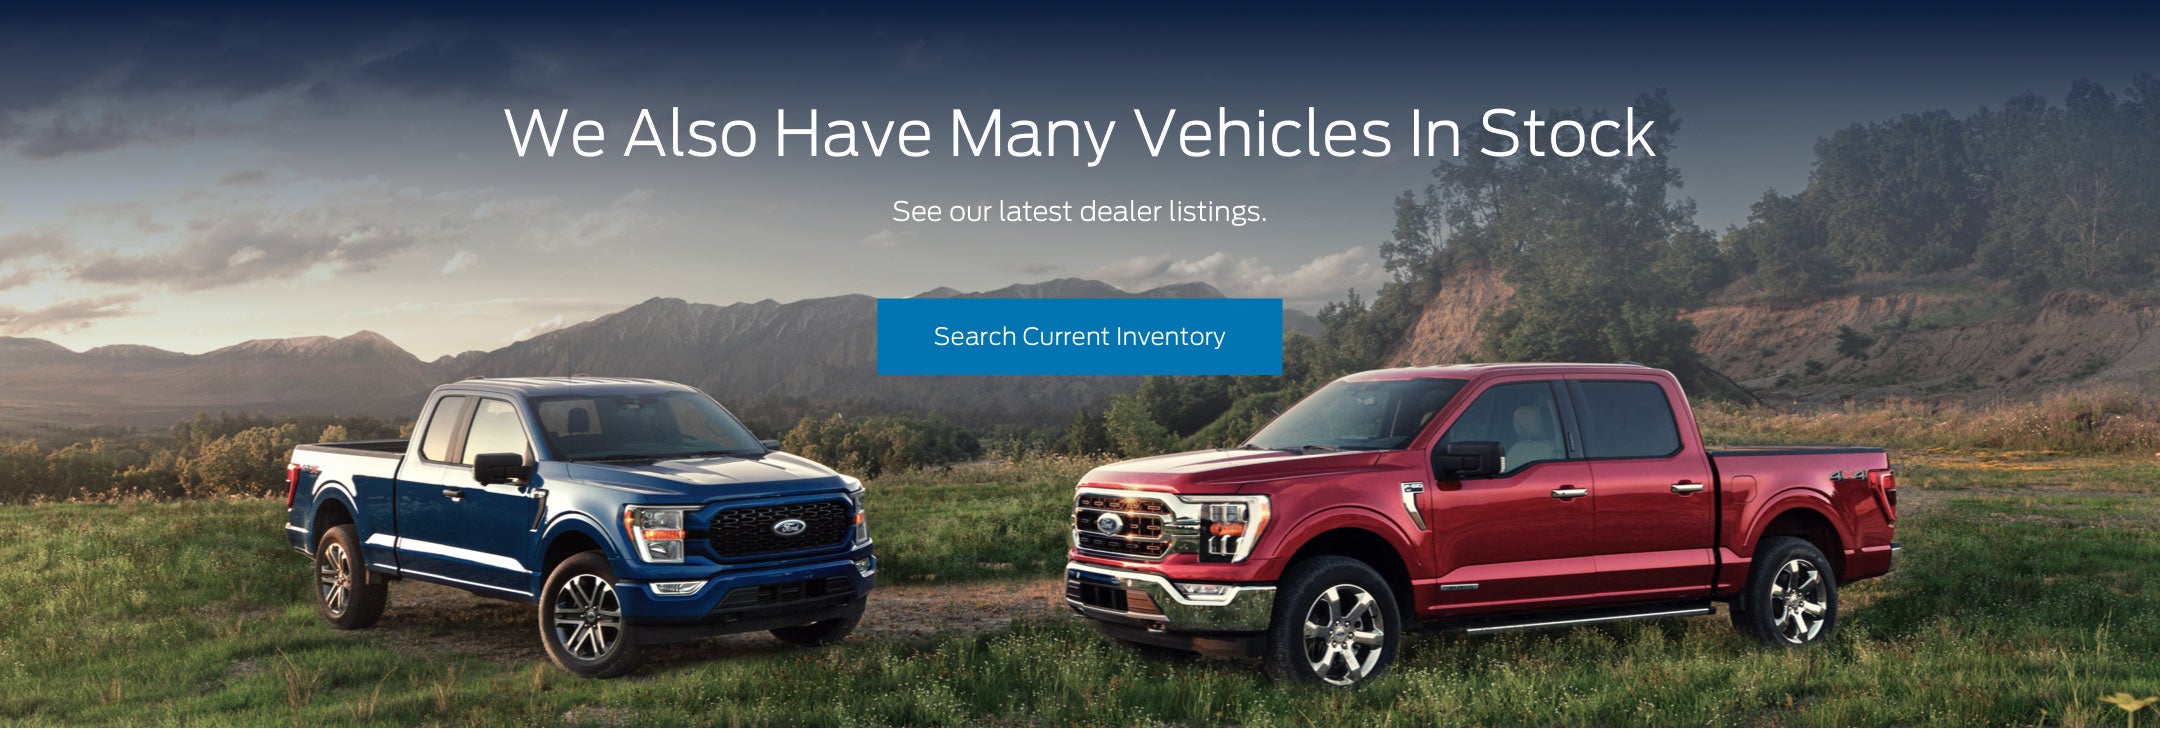 Ford vehicles in stock | Greenbrier Ford in Lewisburg WV